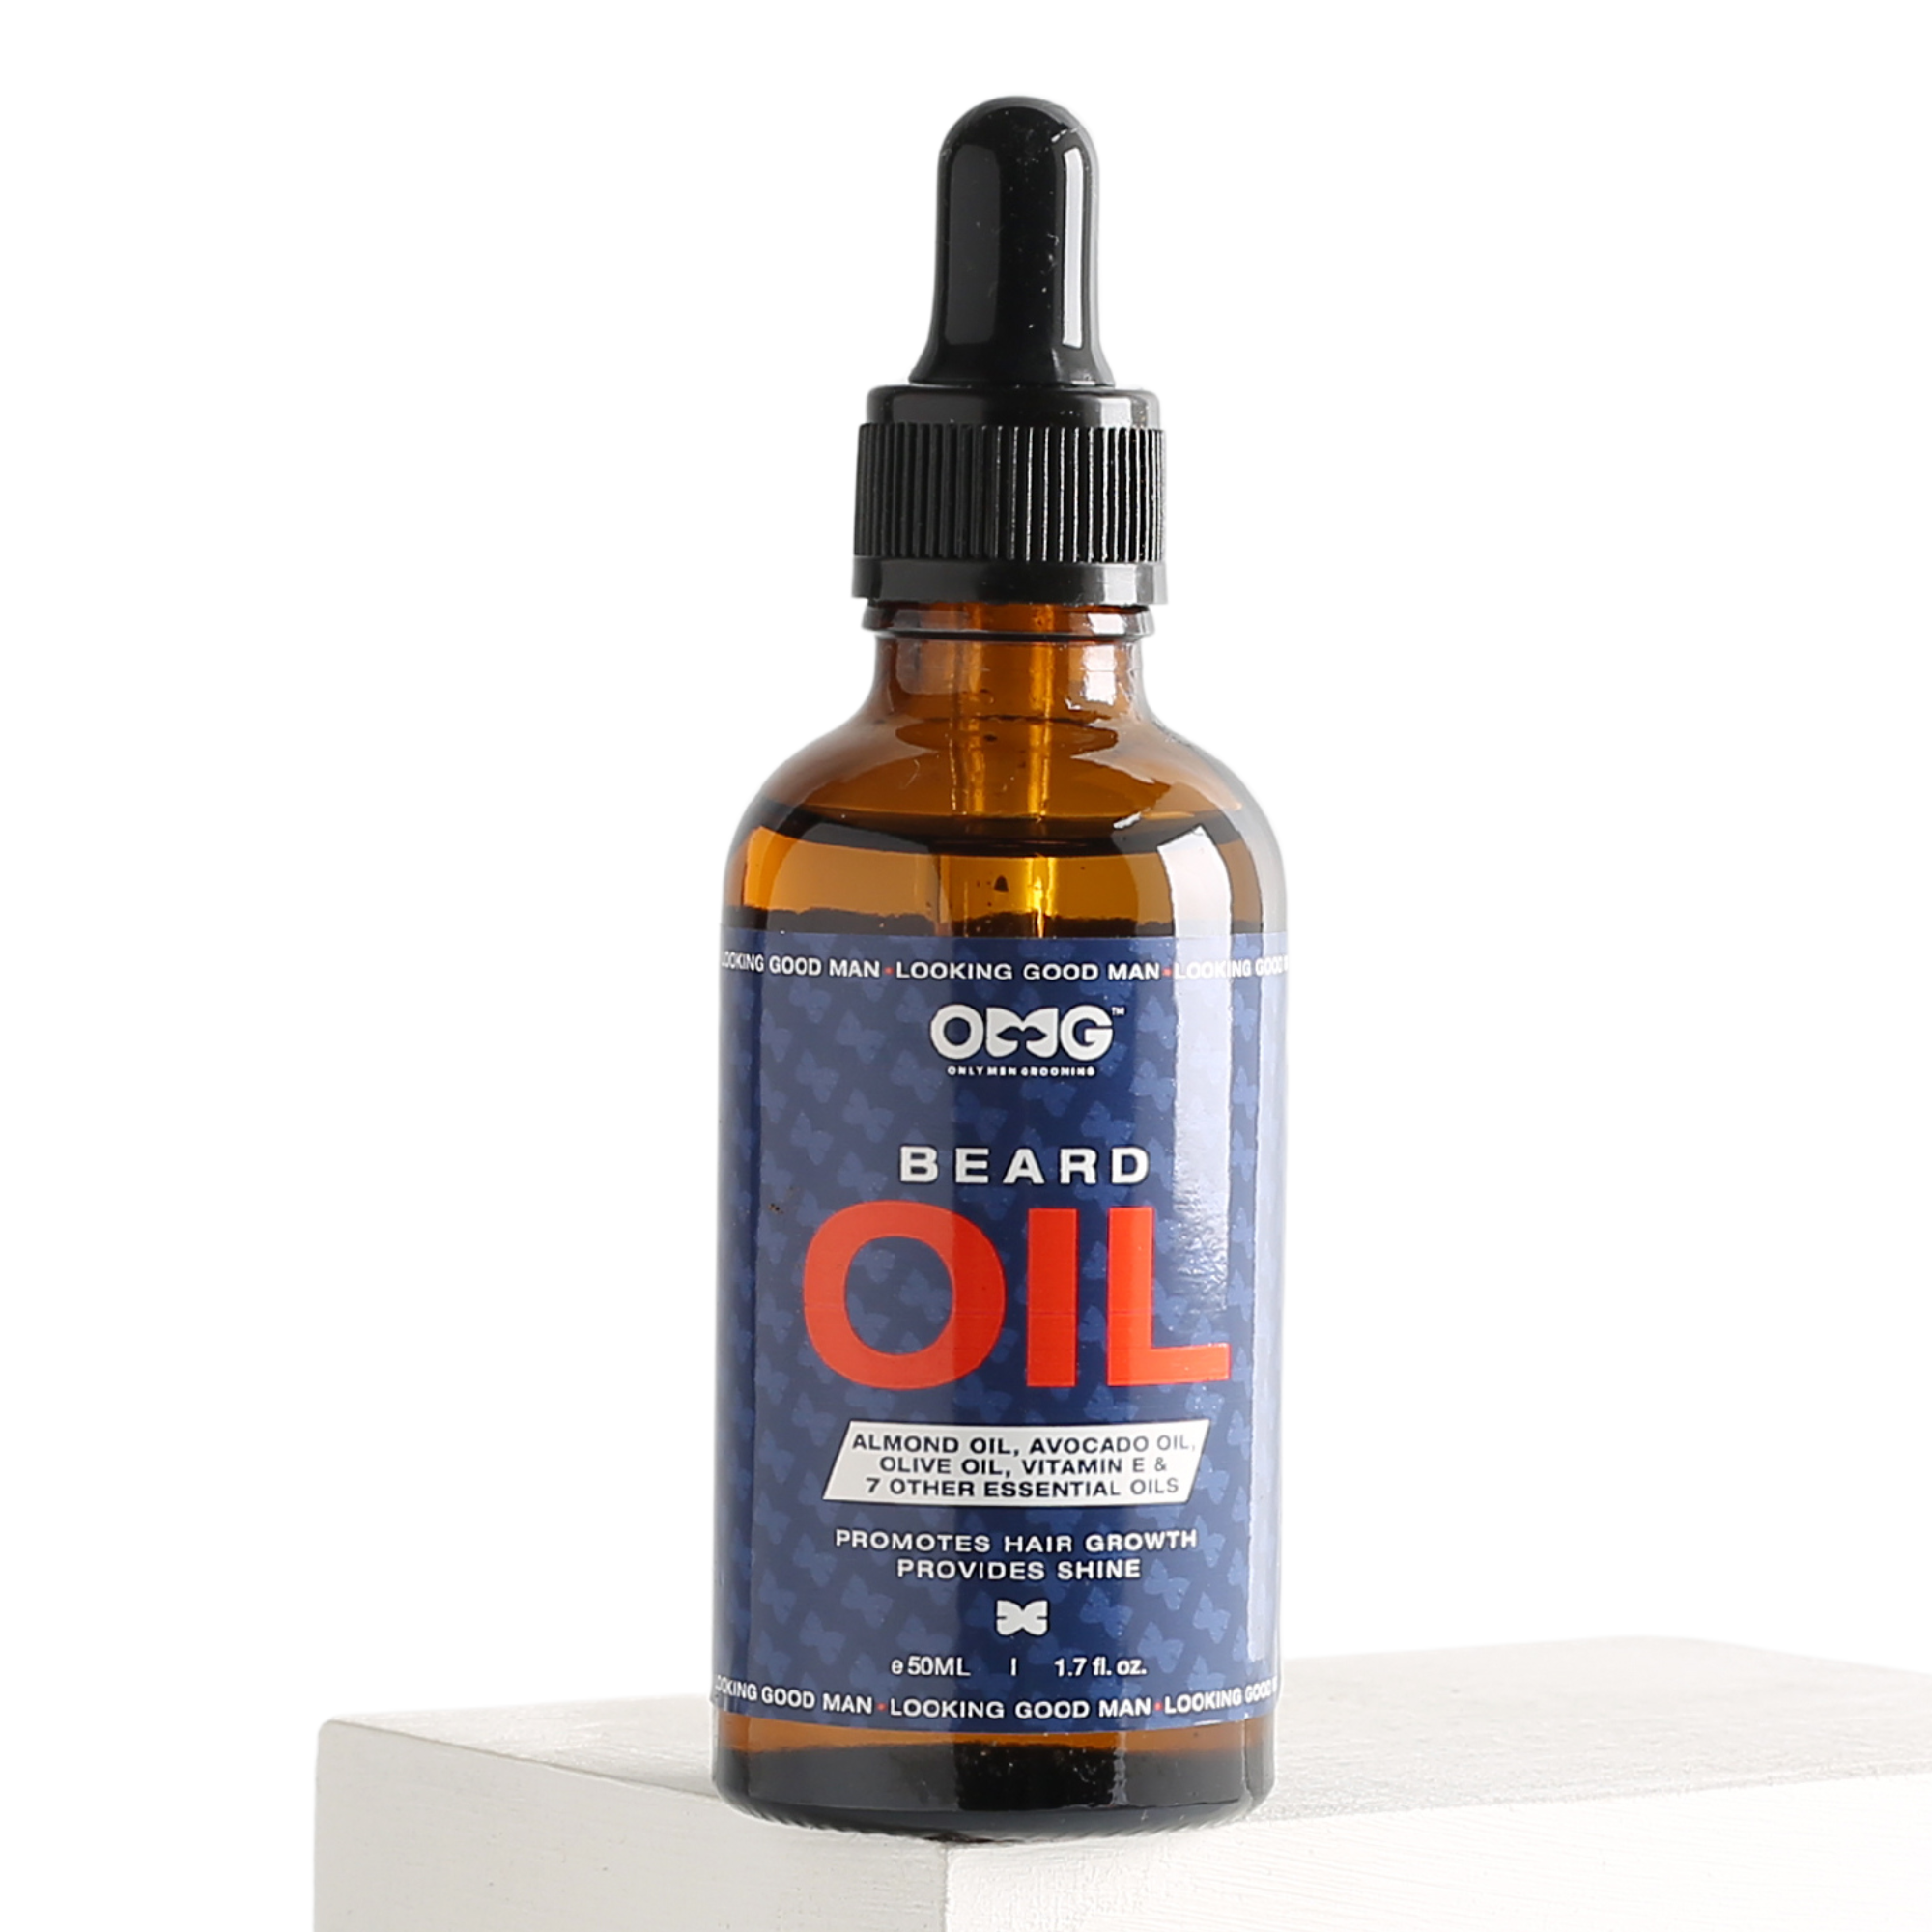 OMG BEARD GROWTH OIL 50ML | PROMOTES BEARD HAIR GROWTH AND GIVES SHINE | ENRICHED WITH VITAMIN E AND 100% NATURAL INGREDIENTS | CONTAINS ALMOND OIL, AVOCADO OIL, OLIVE OIL